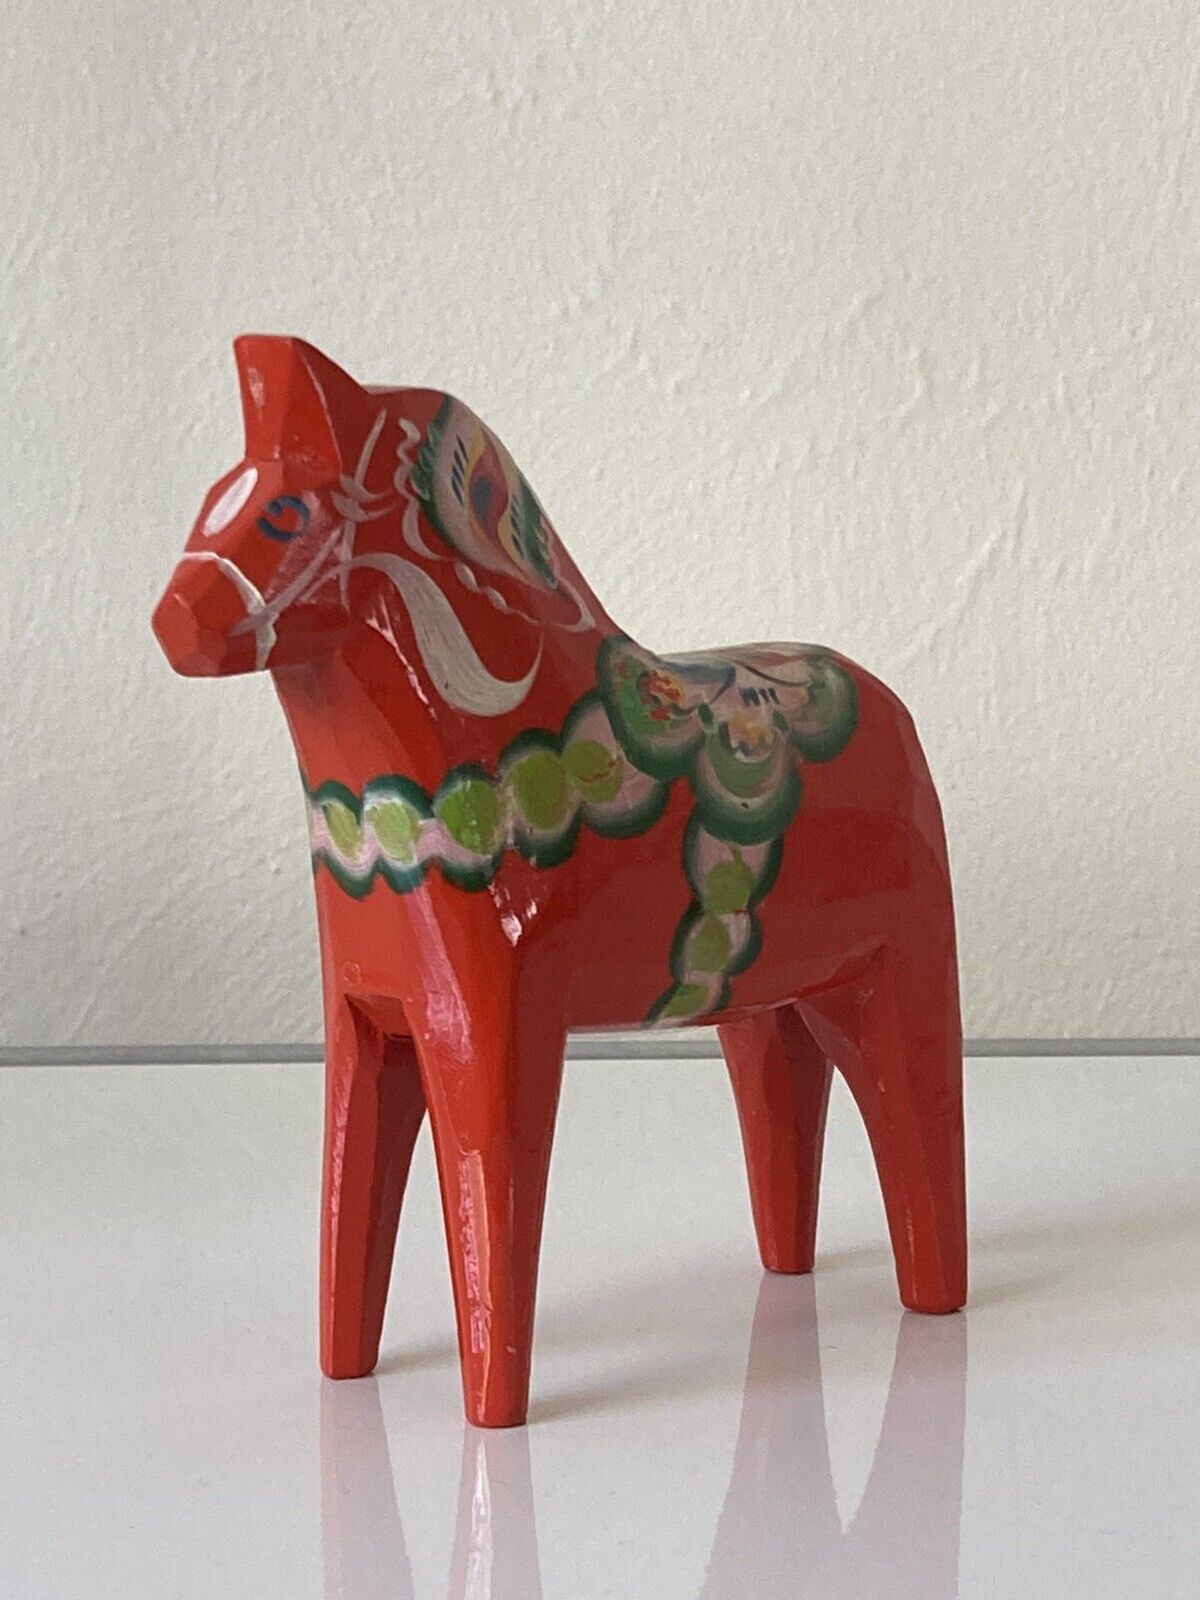 Vintage Sweden Wooden Dala Horse Small Figurine Hand Painted Red